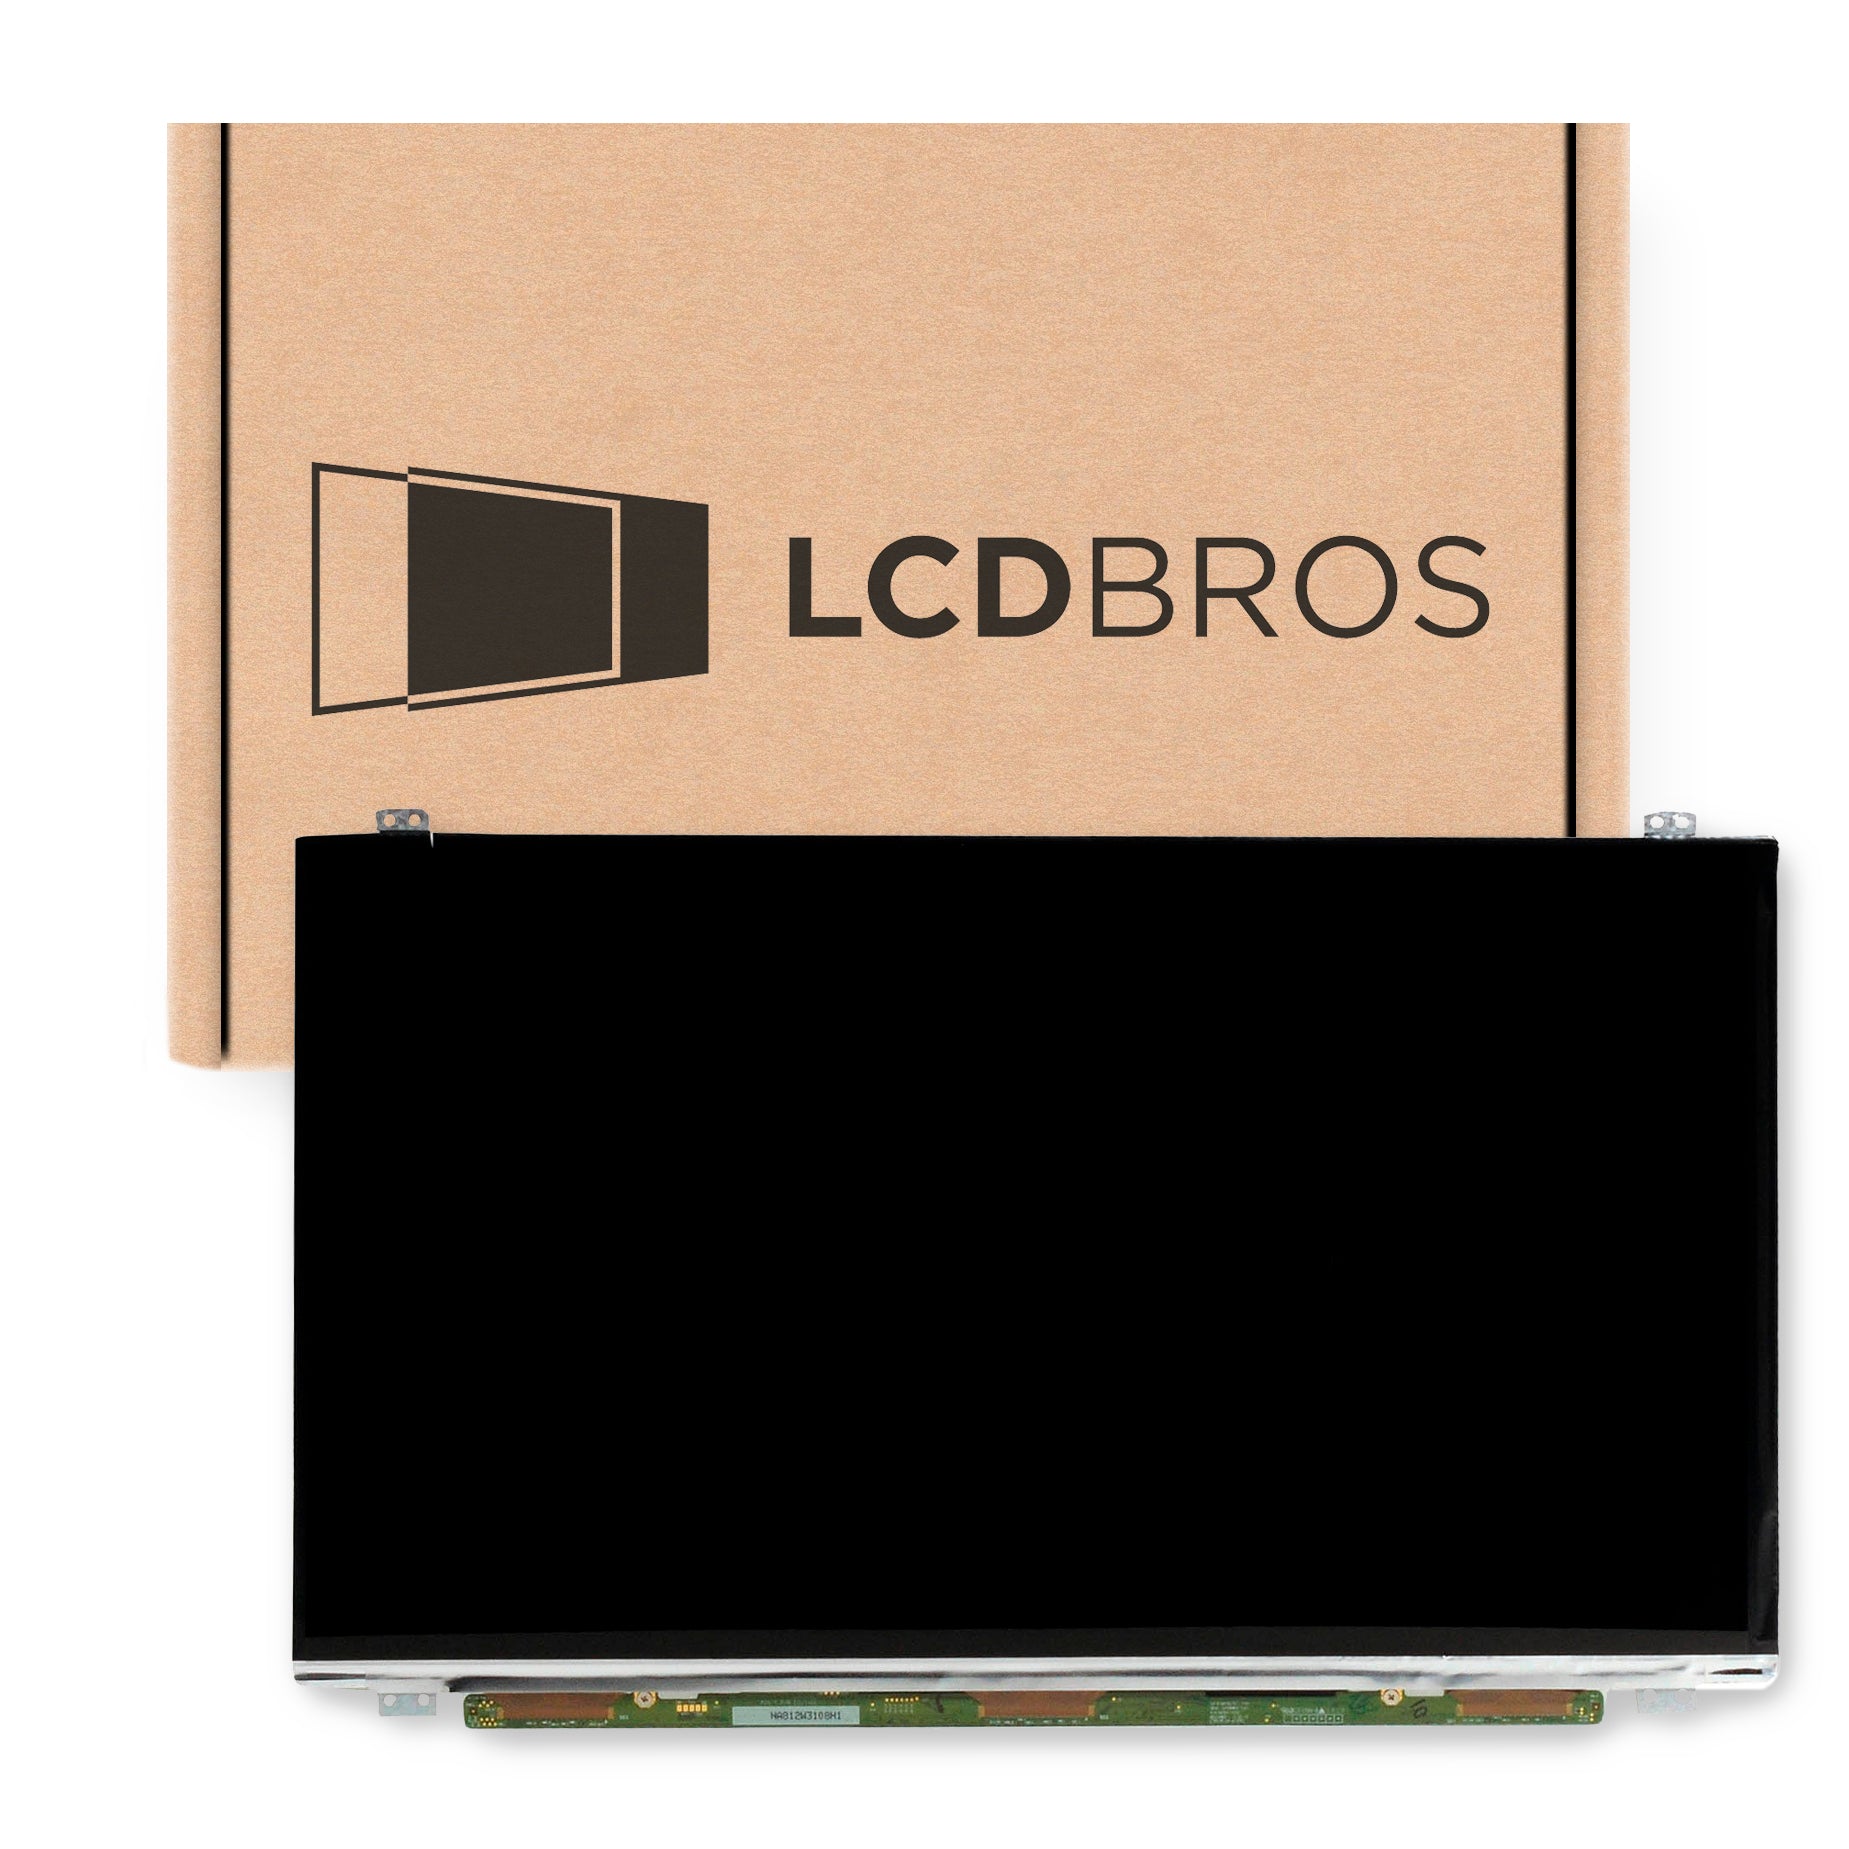 Replacement Screen For Lenovo ideapad P500 20210 HD 1366x768 Glossy LCD LED Display